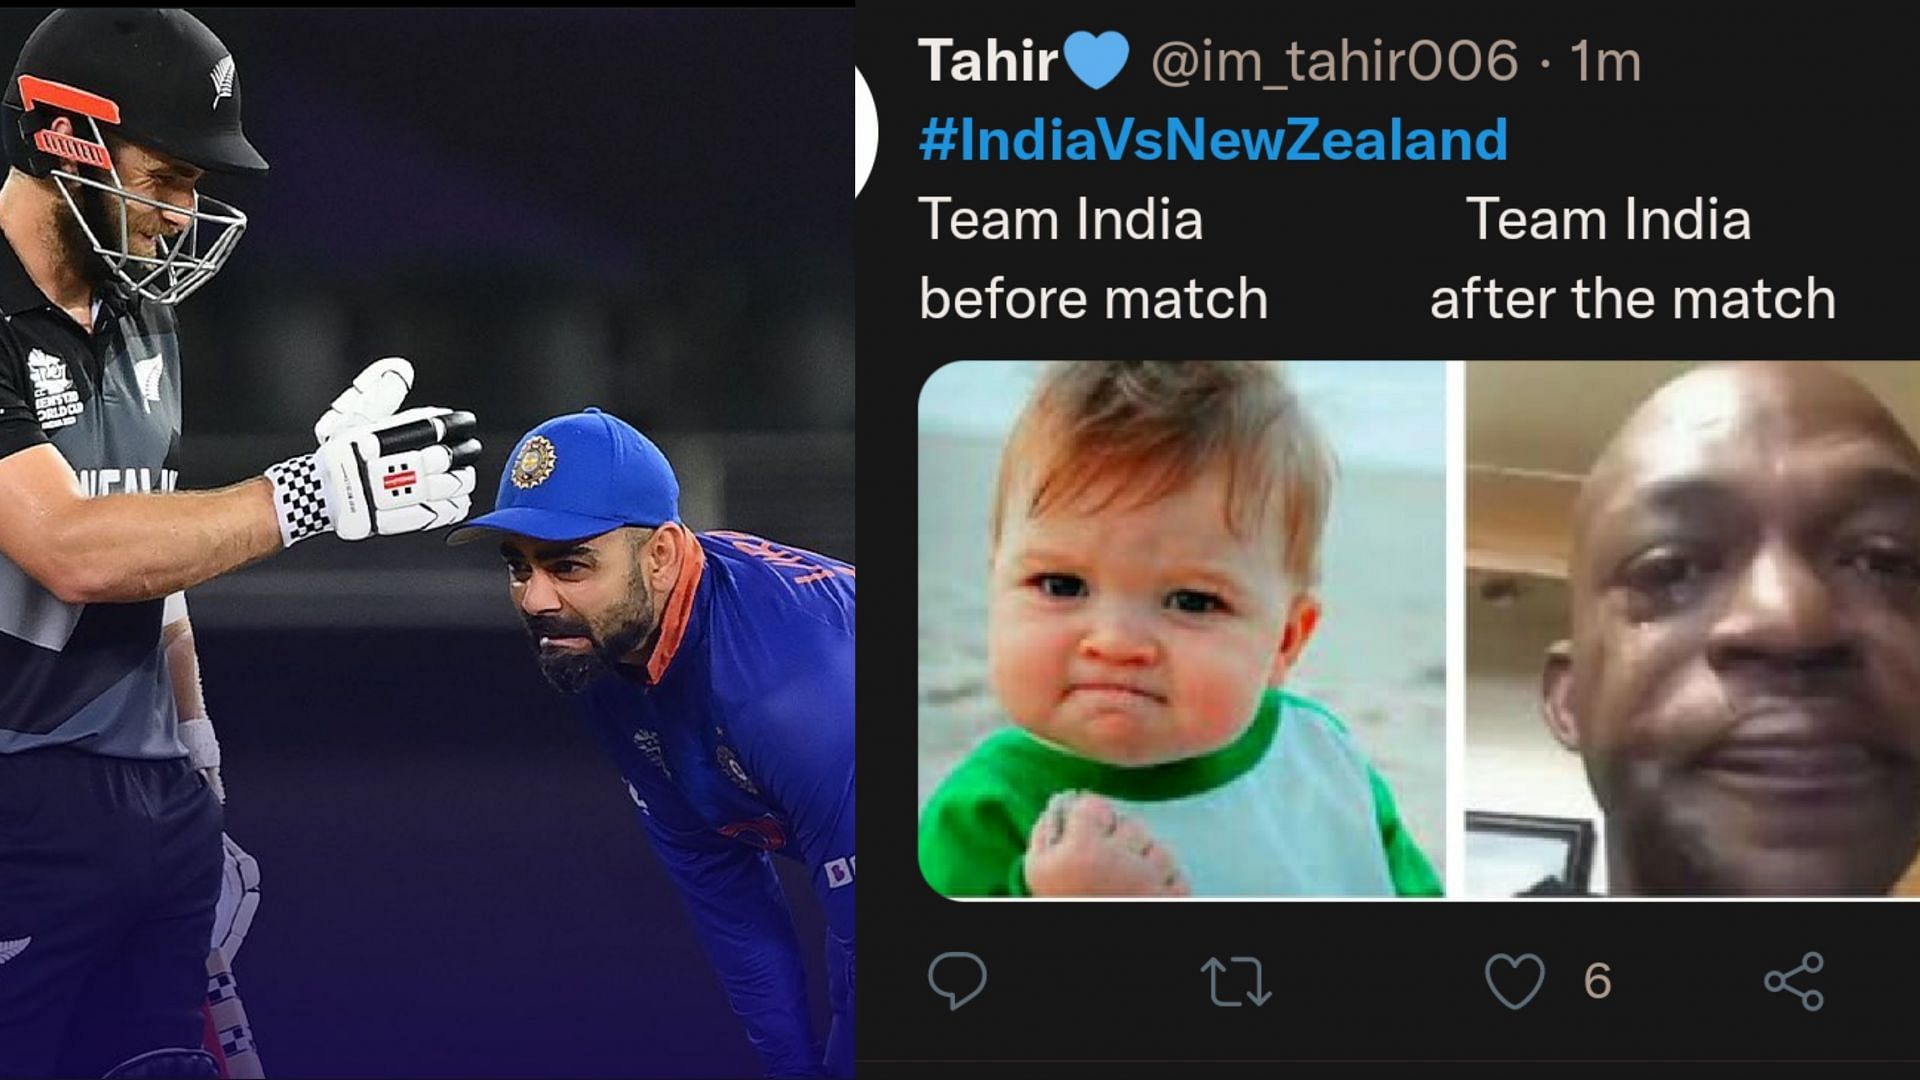 India suffered their second defeat in ICC T20 World Cup 2021